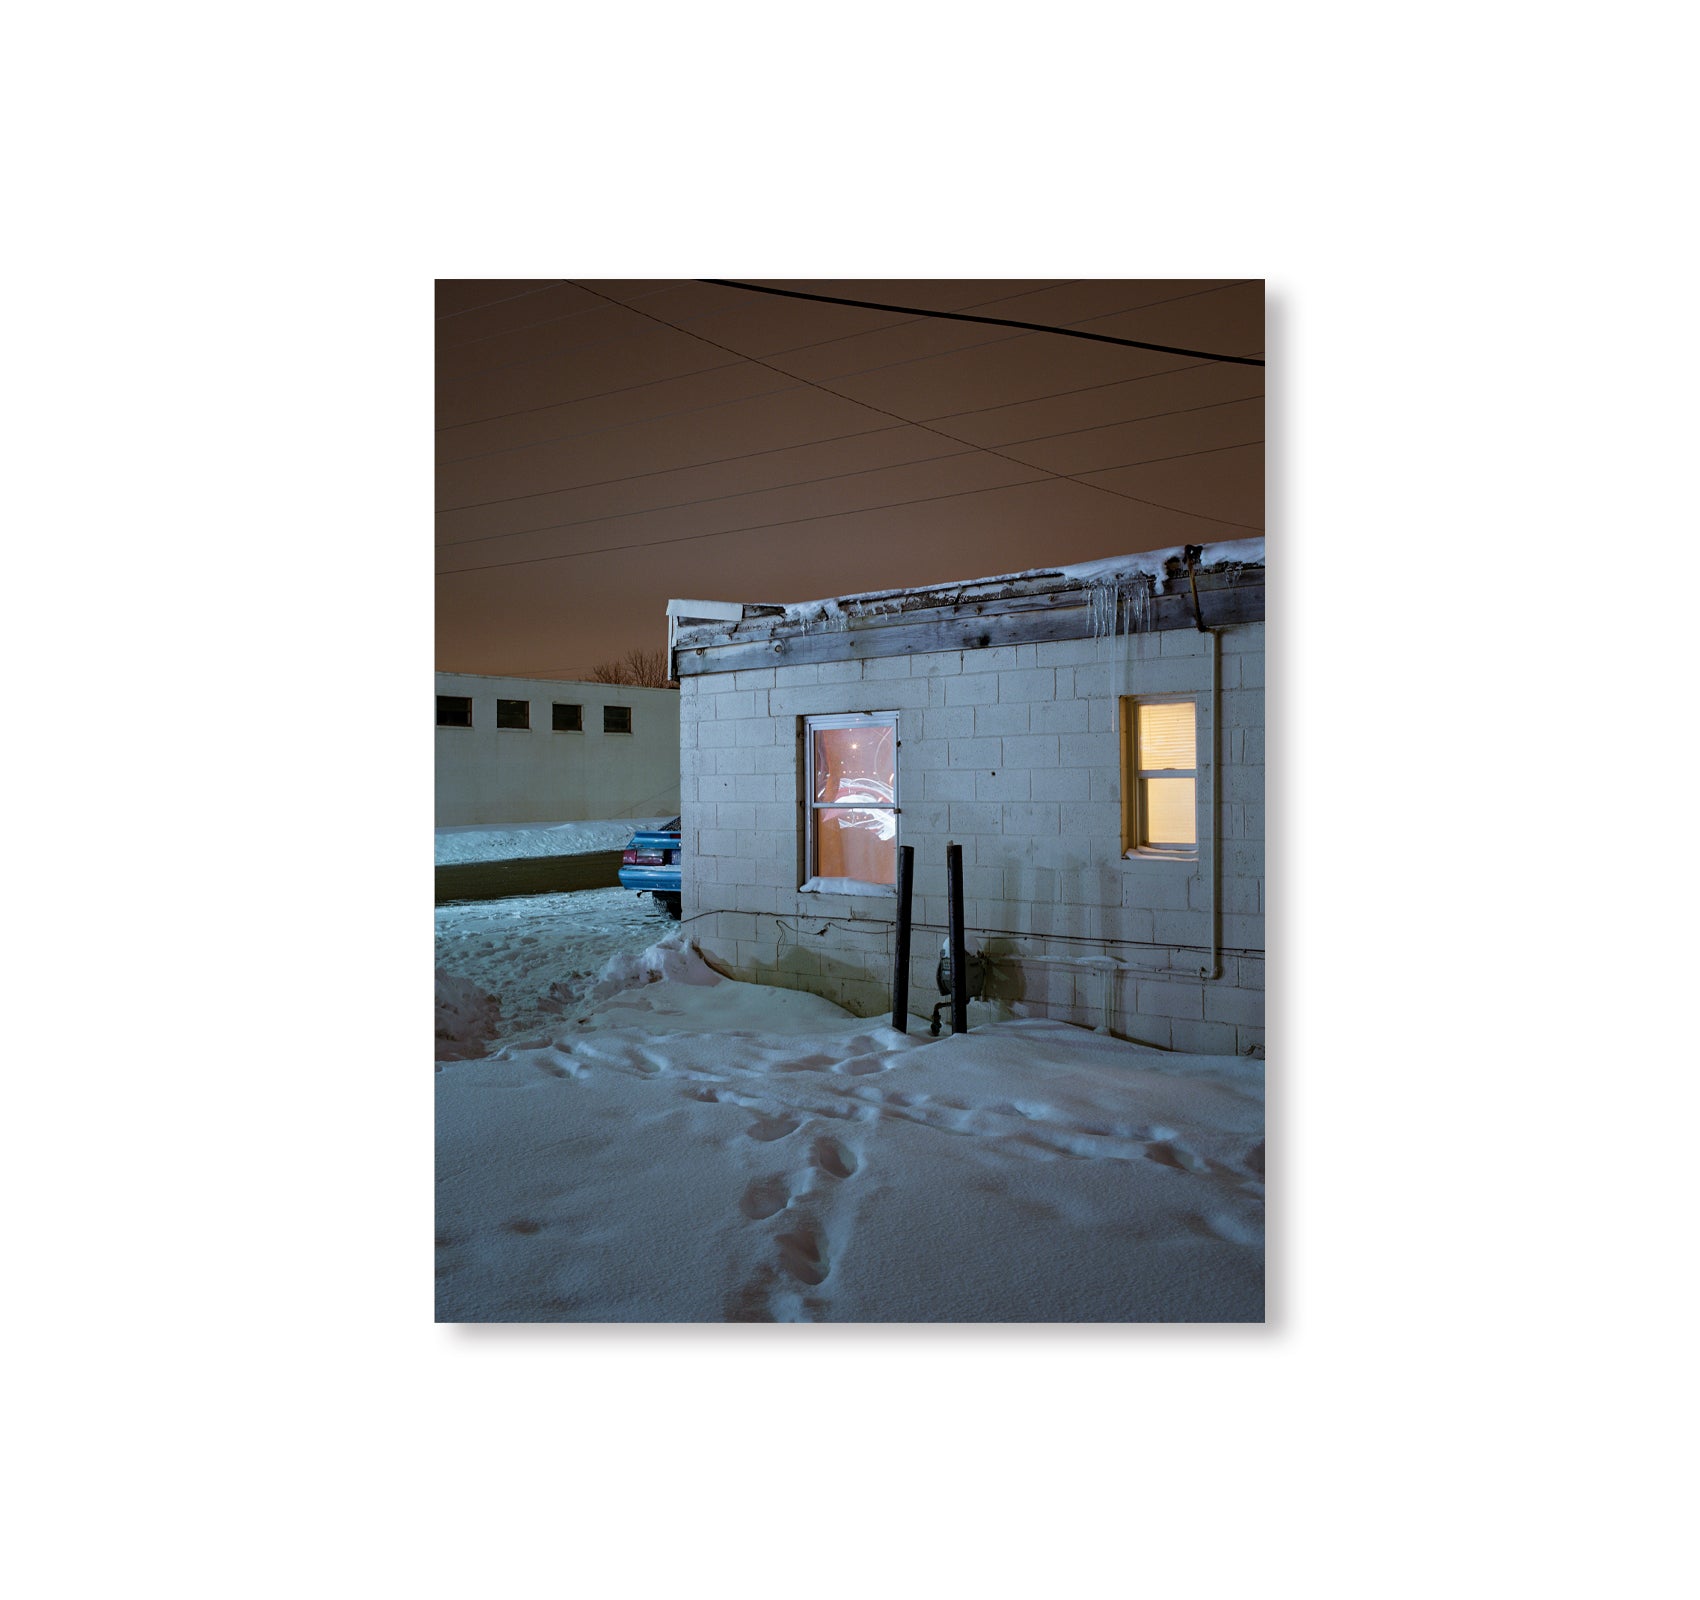 OUTSKIRTS by Todd Hido [SPECIAL EDITION]